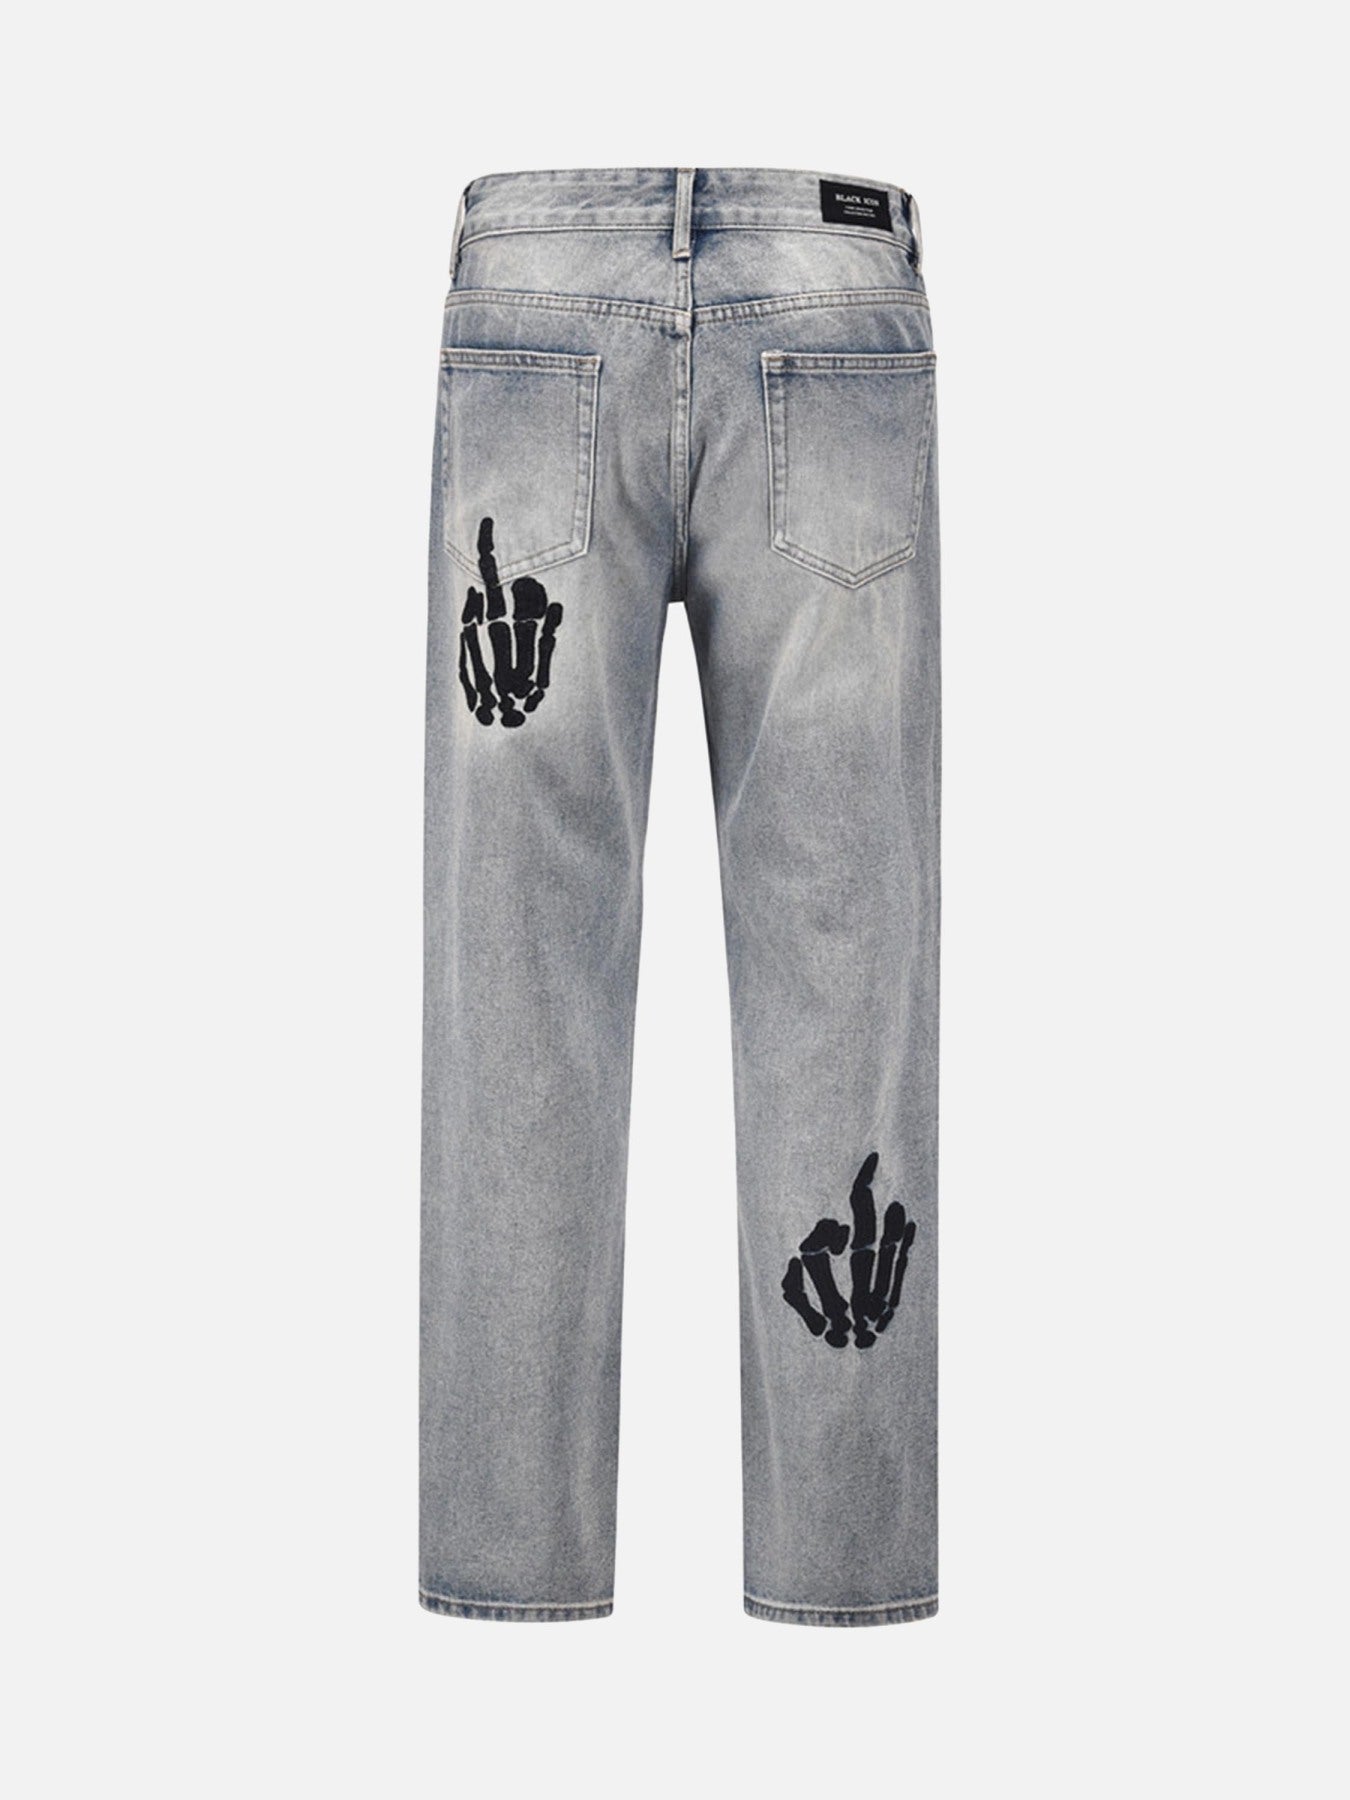 The Supermade Skull Gesture Embroidered Jeans